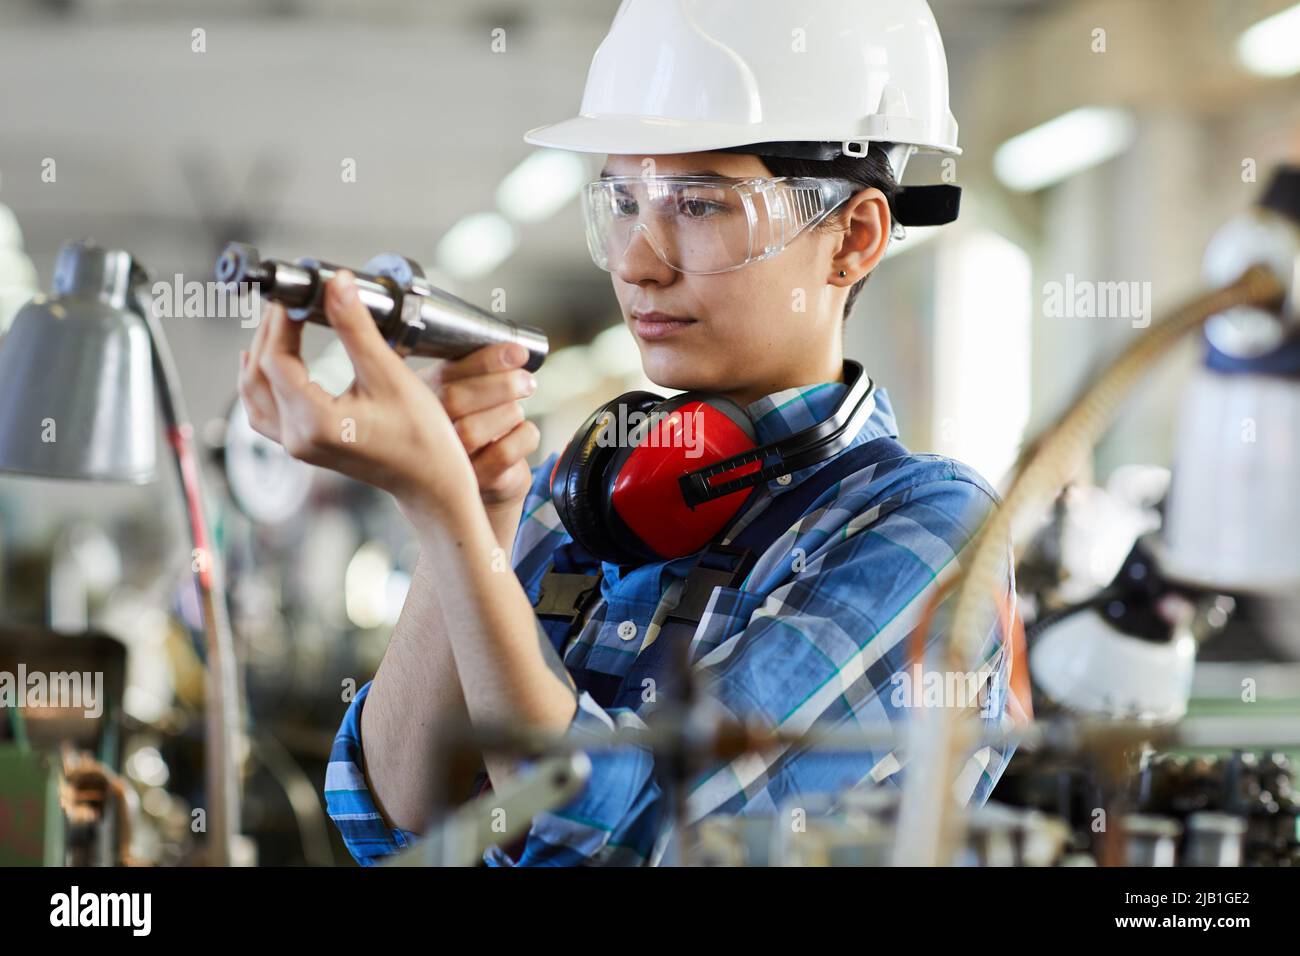 Serious female technical engineer in construction hardhat and safety goggles checking drill bit while repairing machine for producing clock movements Stock Photo